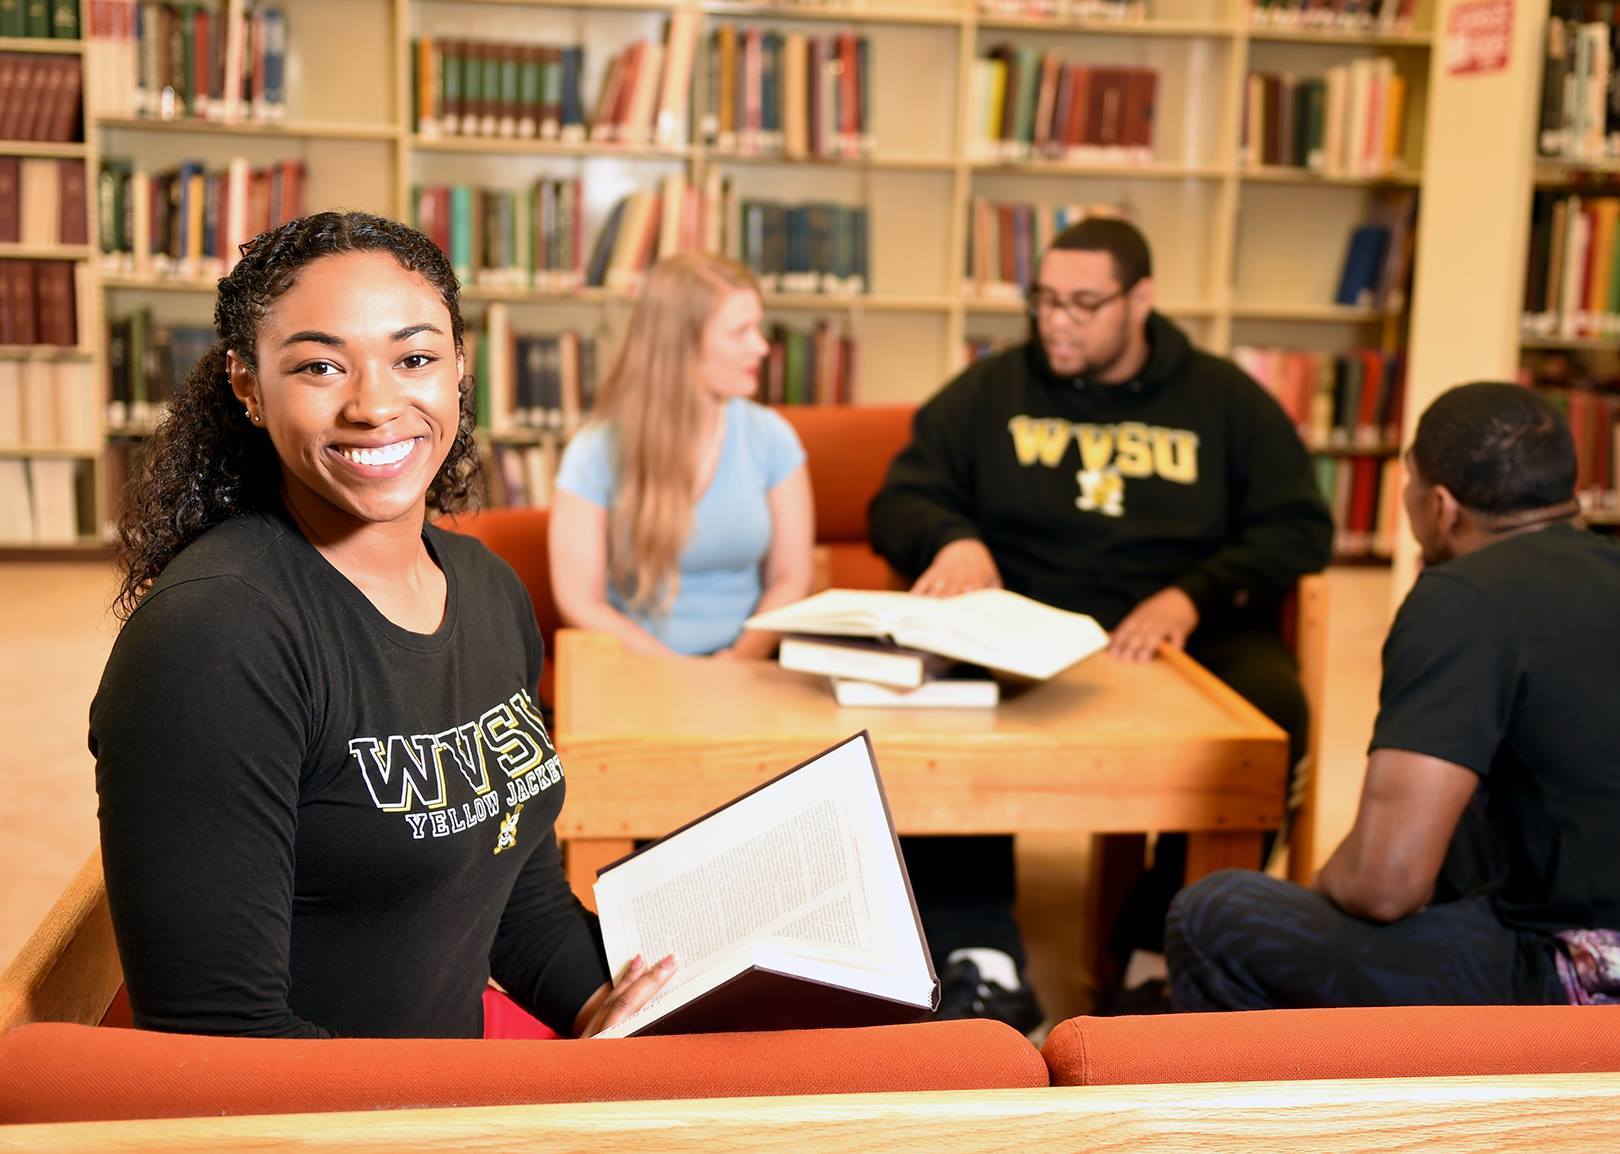 In the library, a student smiles while reading a book in a WVSU shirt. Three students study in the background.